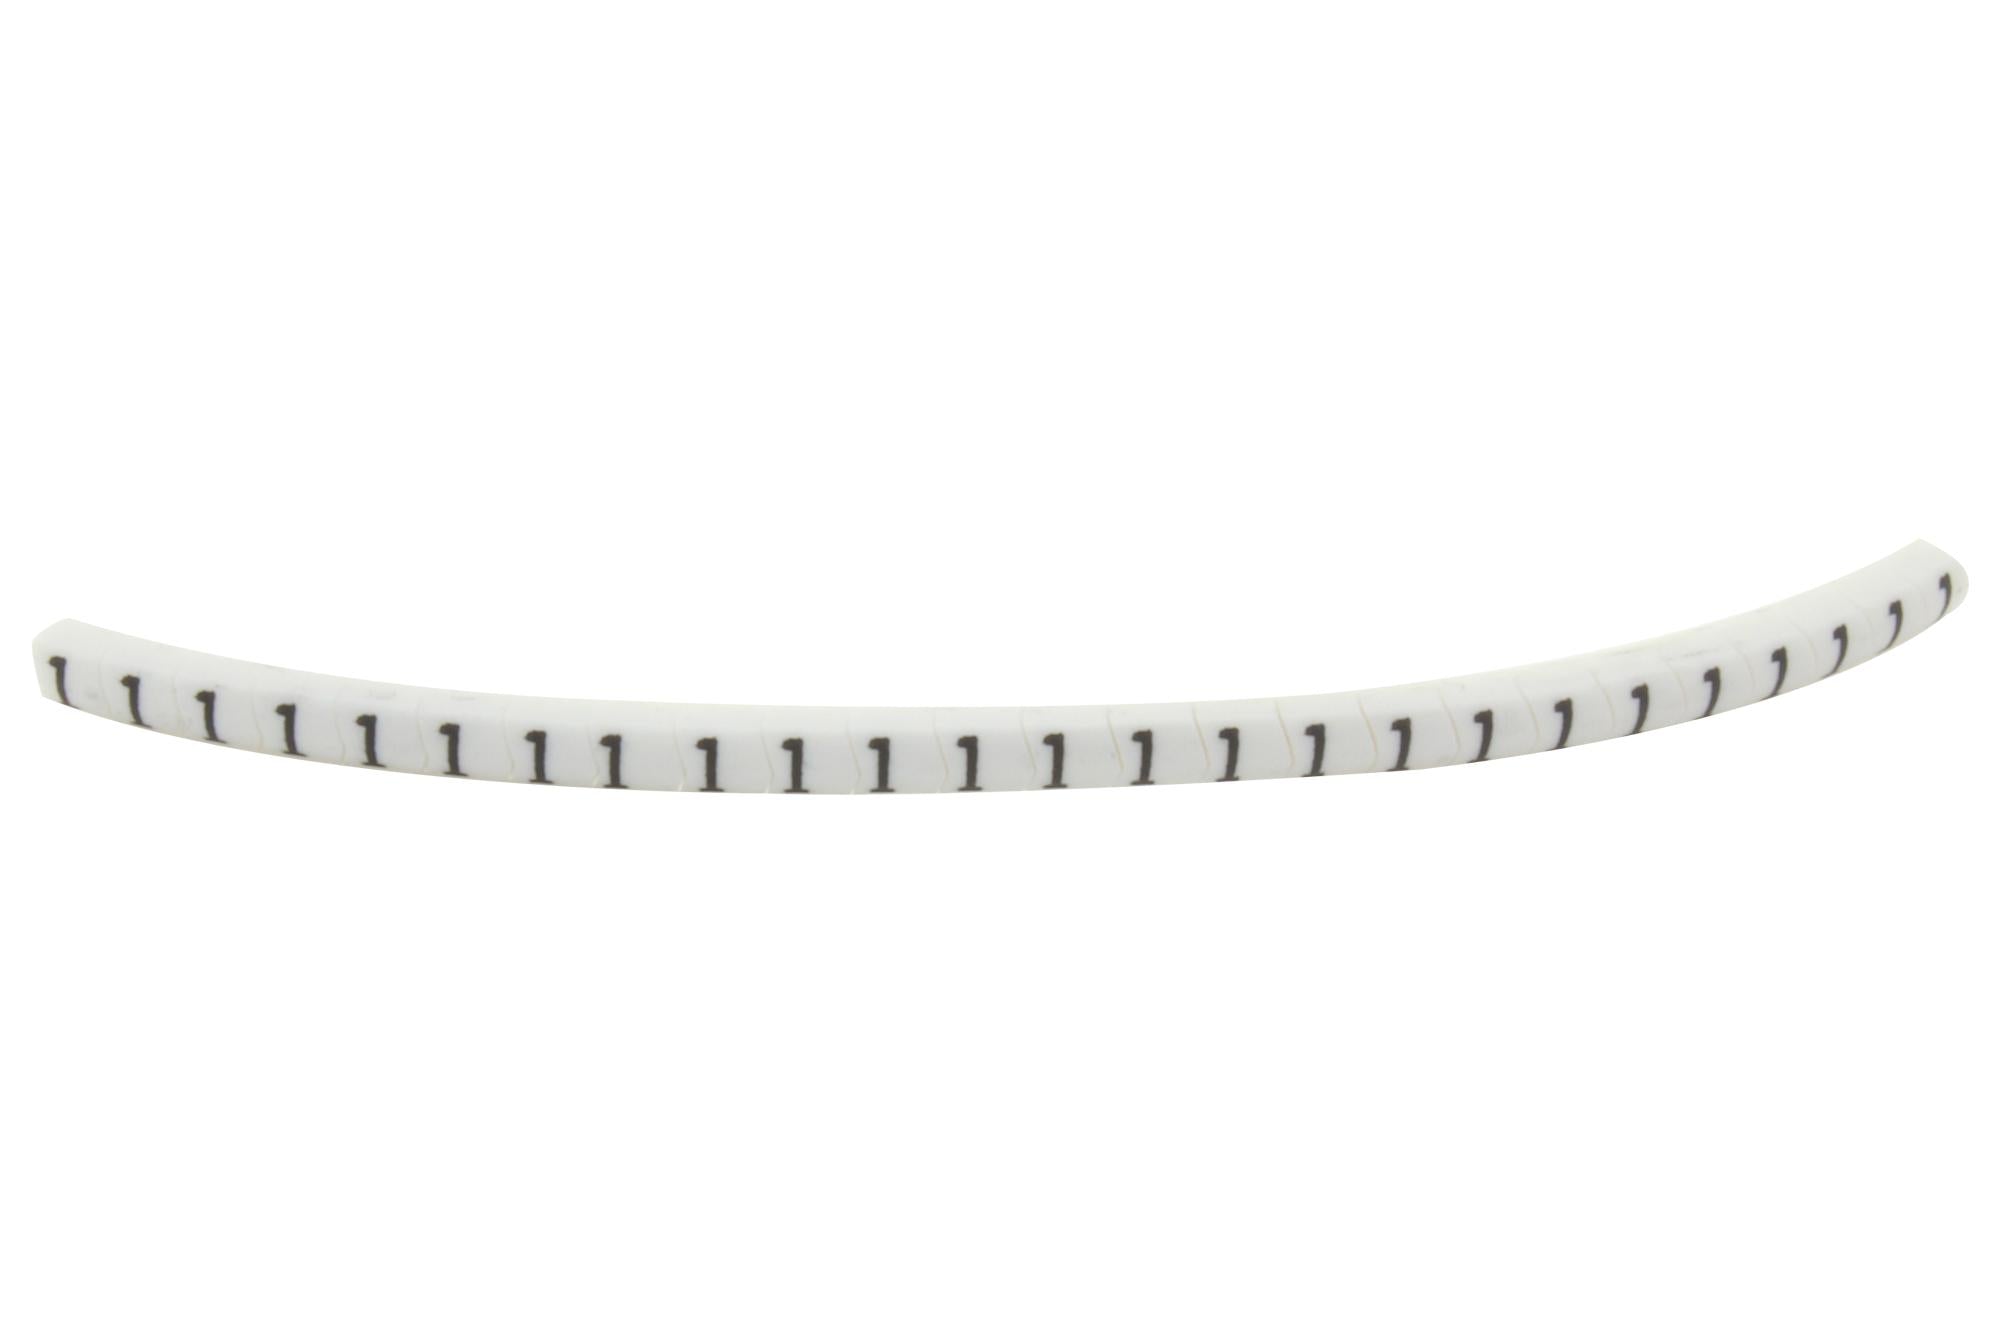 901-11016 CABLE MARKER, PRE PRINTED, PVC, WHITE HELLERMANNTYTON